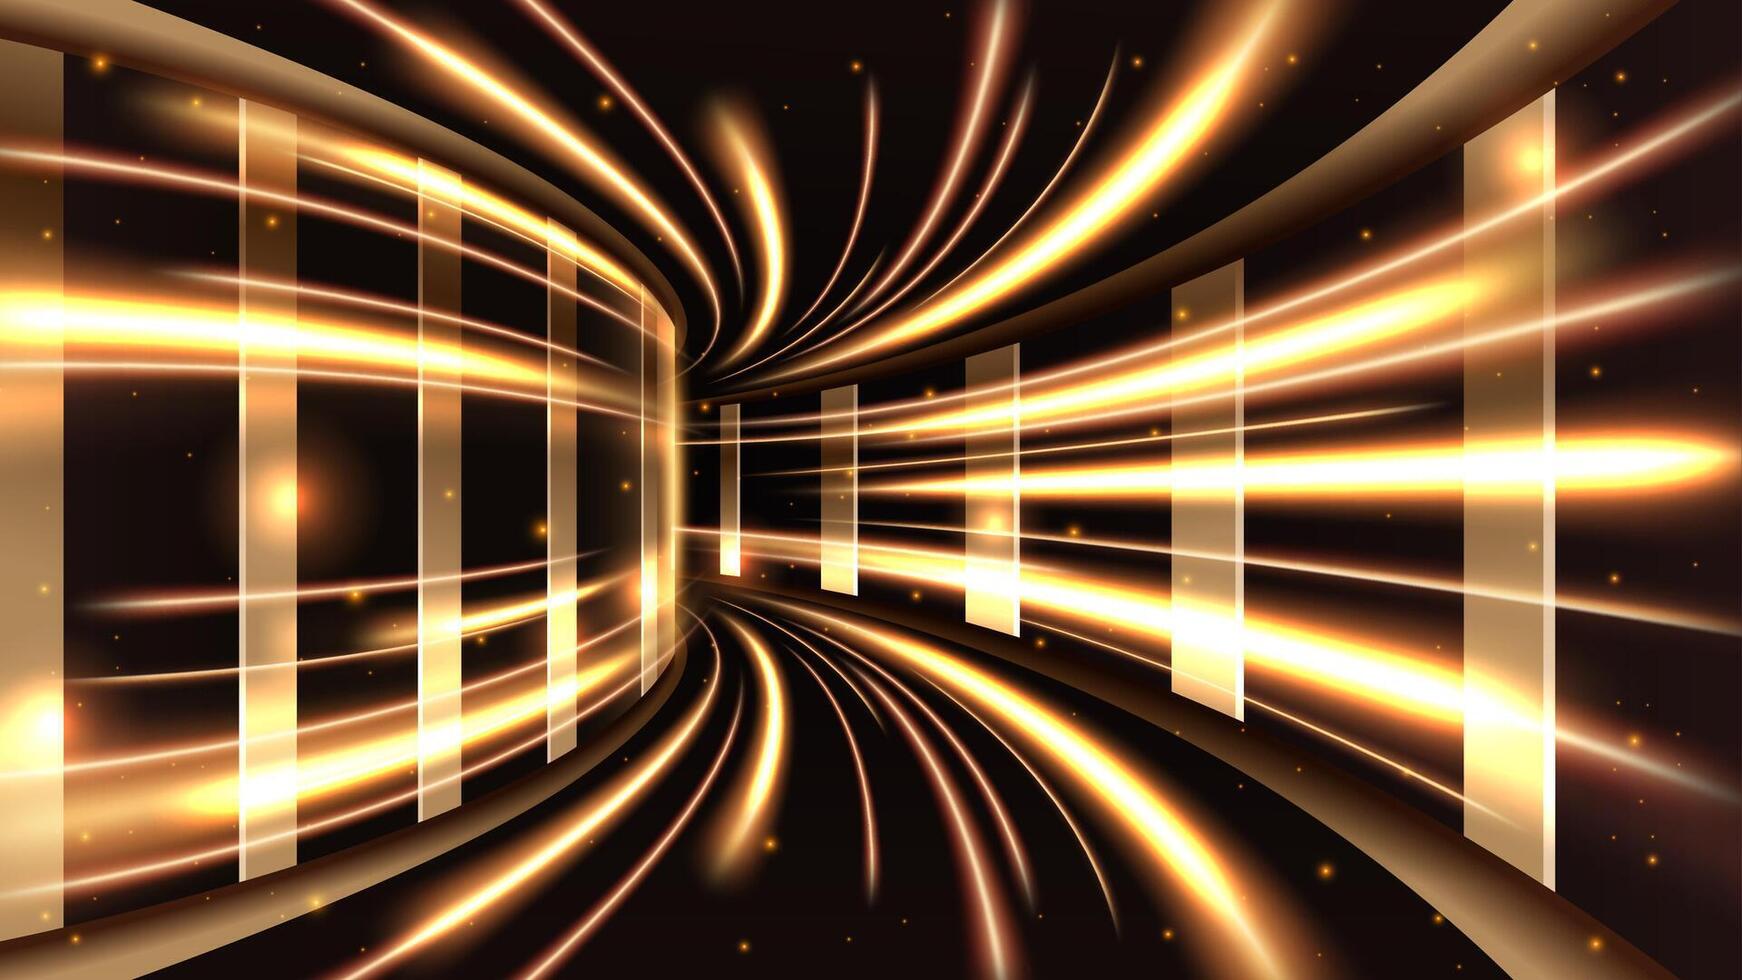 Abstract Gold Light Lines Passed along The Edge of The Hallway, Vector Illustration